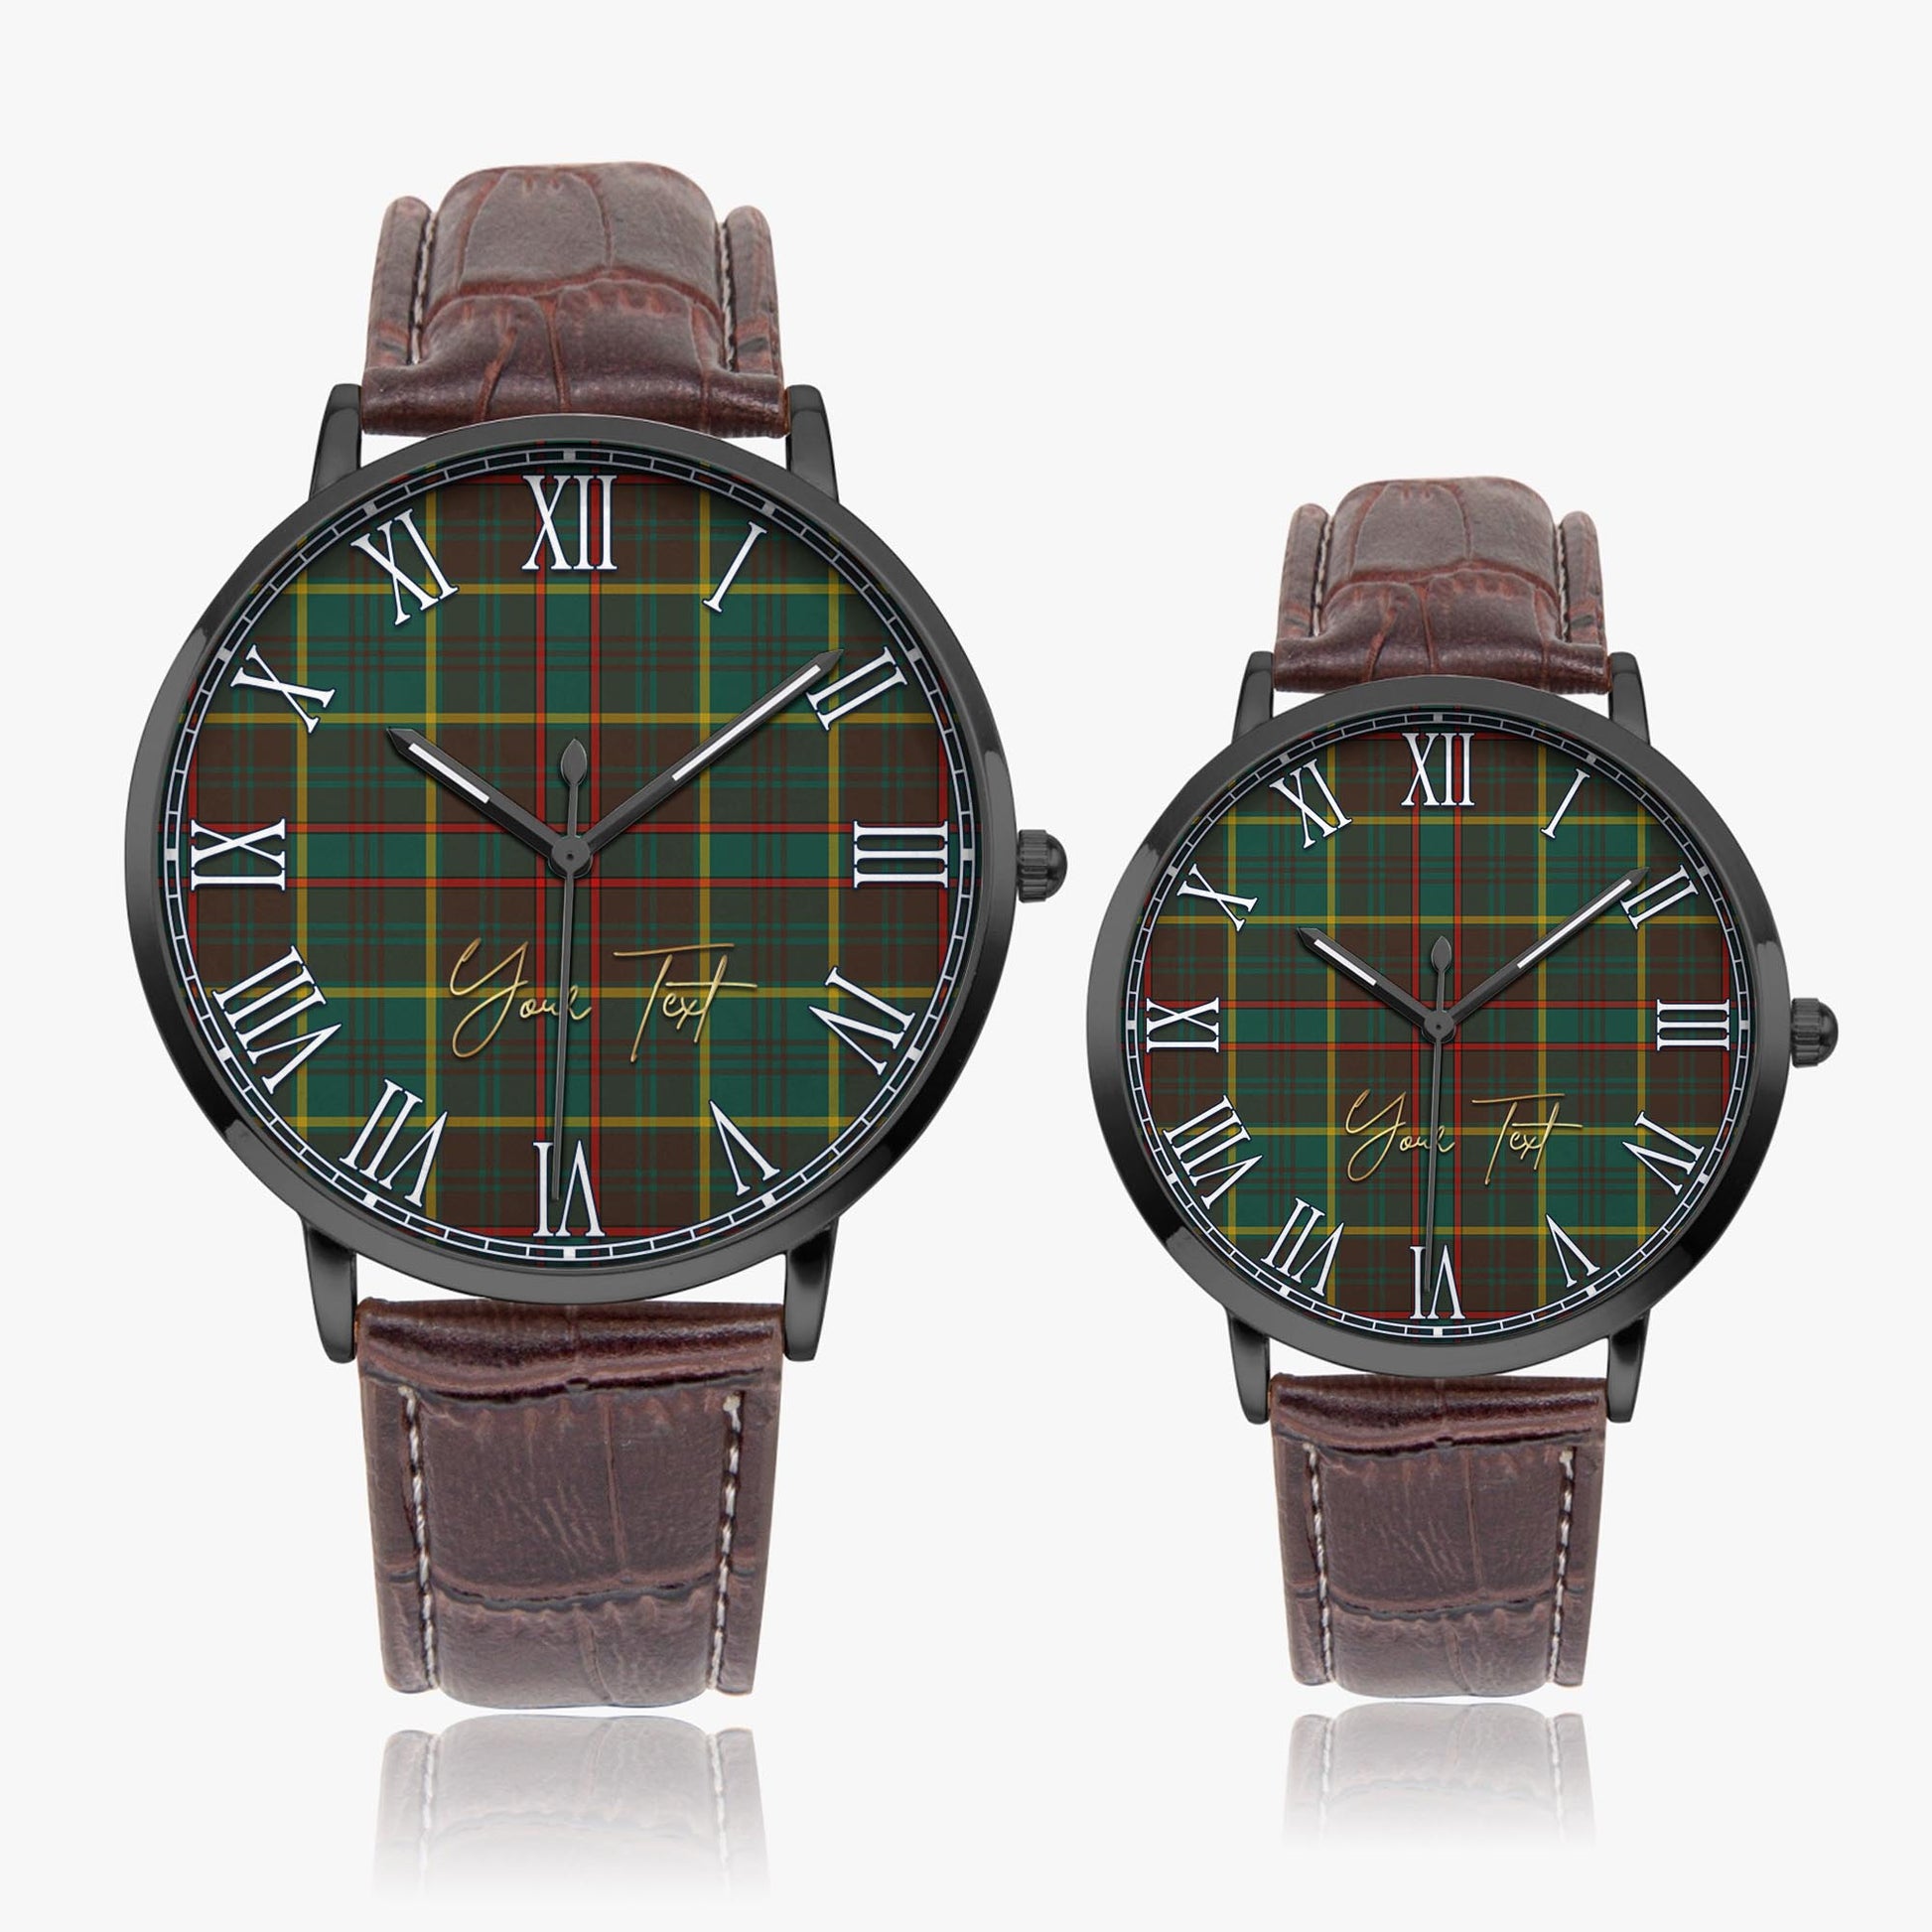 Ontario Province Canada Tartan Personalized Your Text Leather Trap Quartz Watch Ultra Thin Black Case With Brown Leather Strap - Tartanvibesclothing